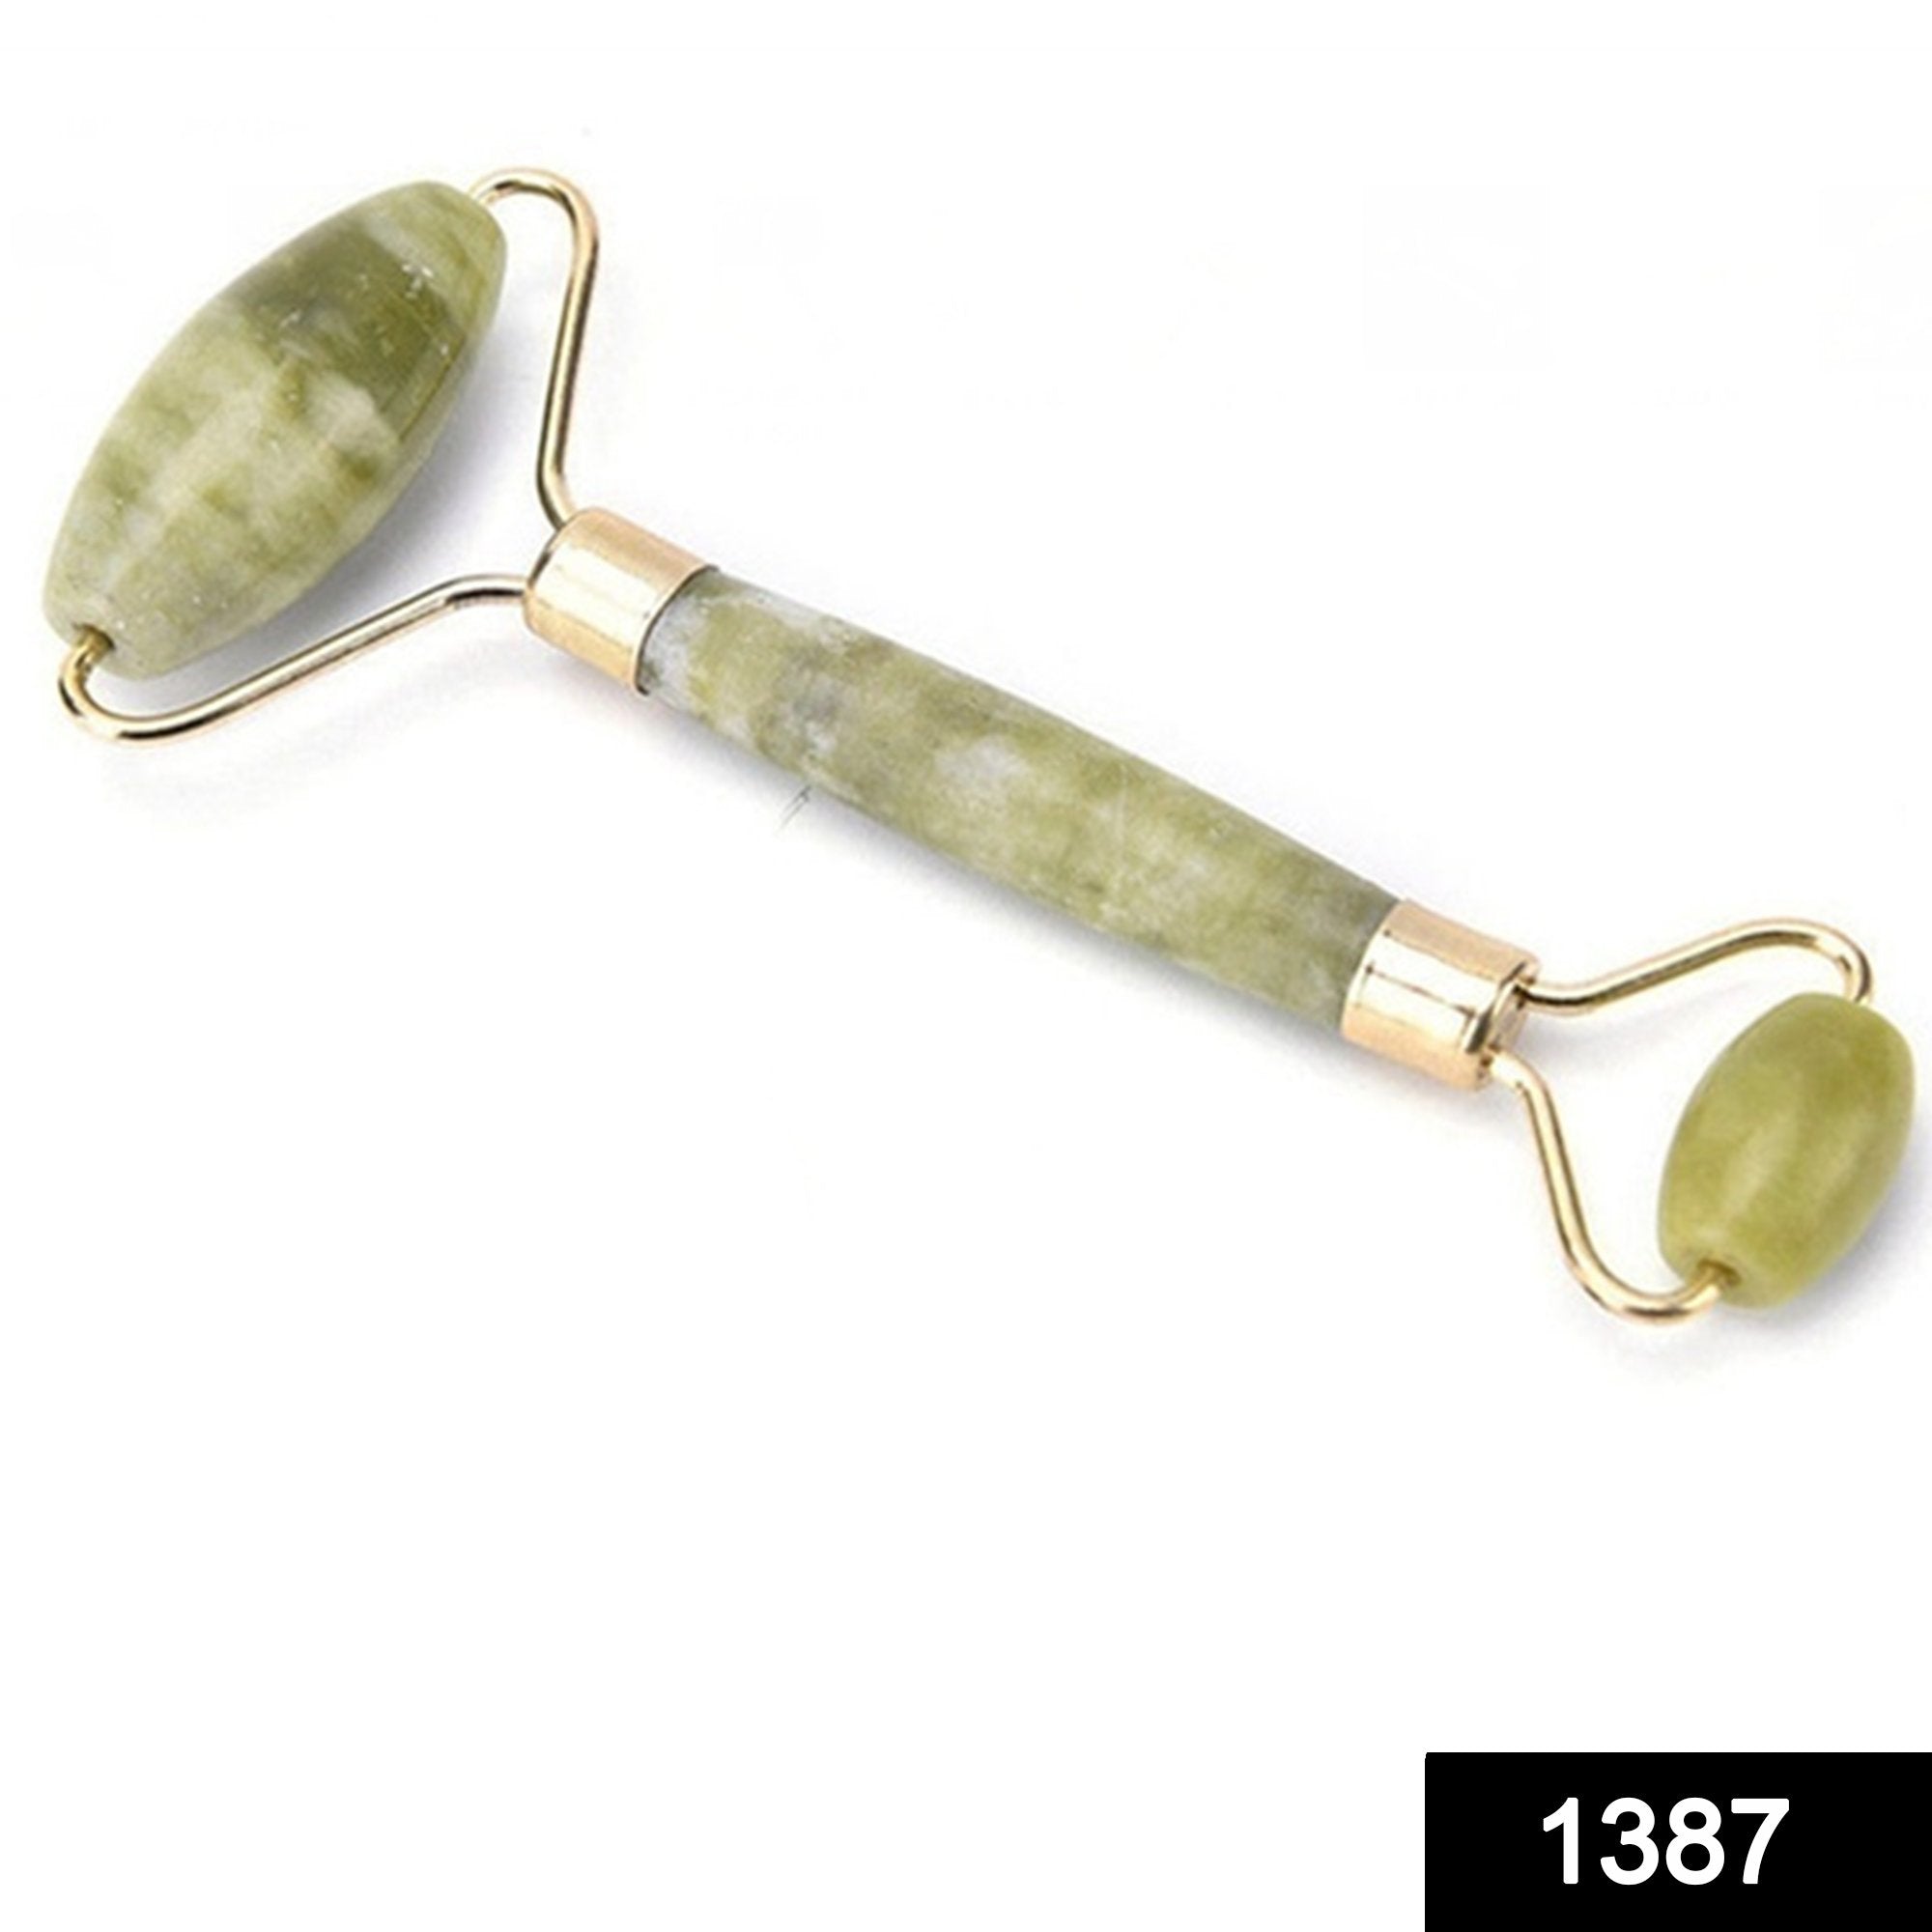 1387 Smooth Facial Roller & Massager Natural Massage Jade Stone - SkyShopy